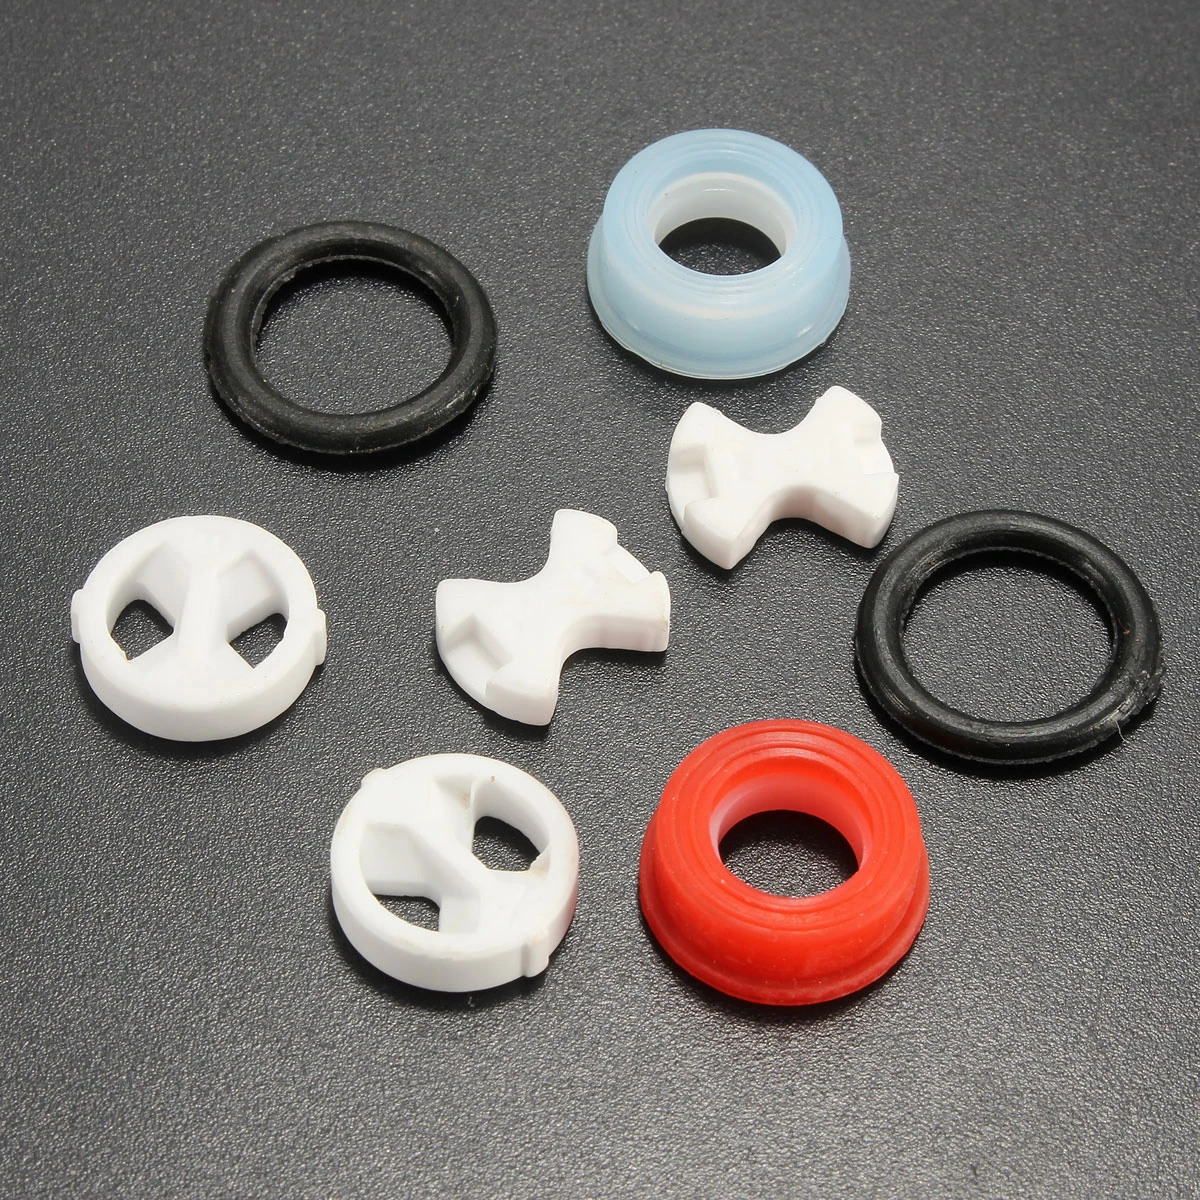 8Pcs Ceramic Disc Silicon Washer Insert Turn Replacement 1/2 for Valve Tap